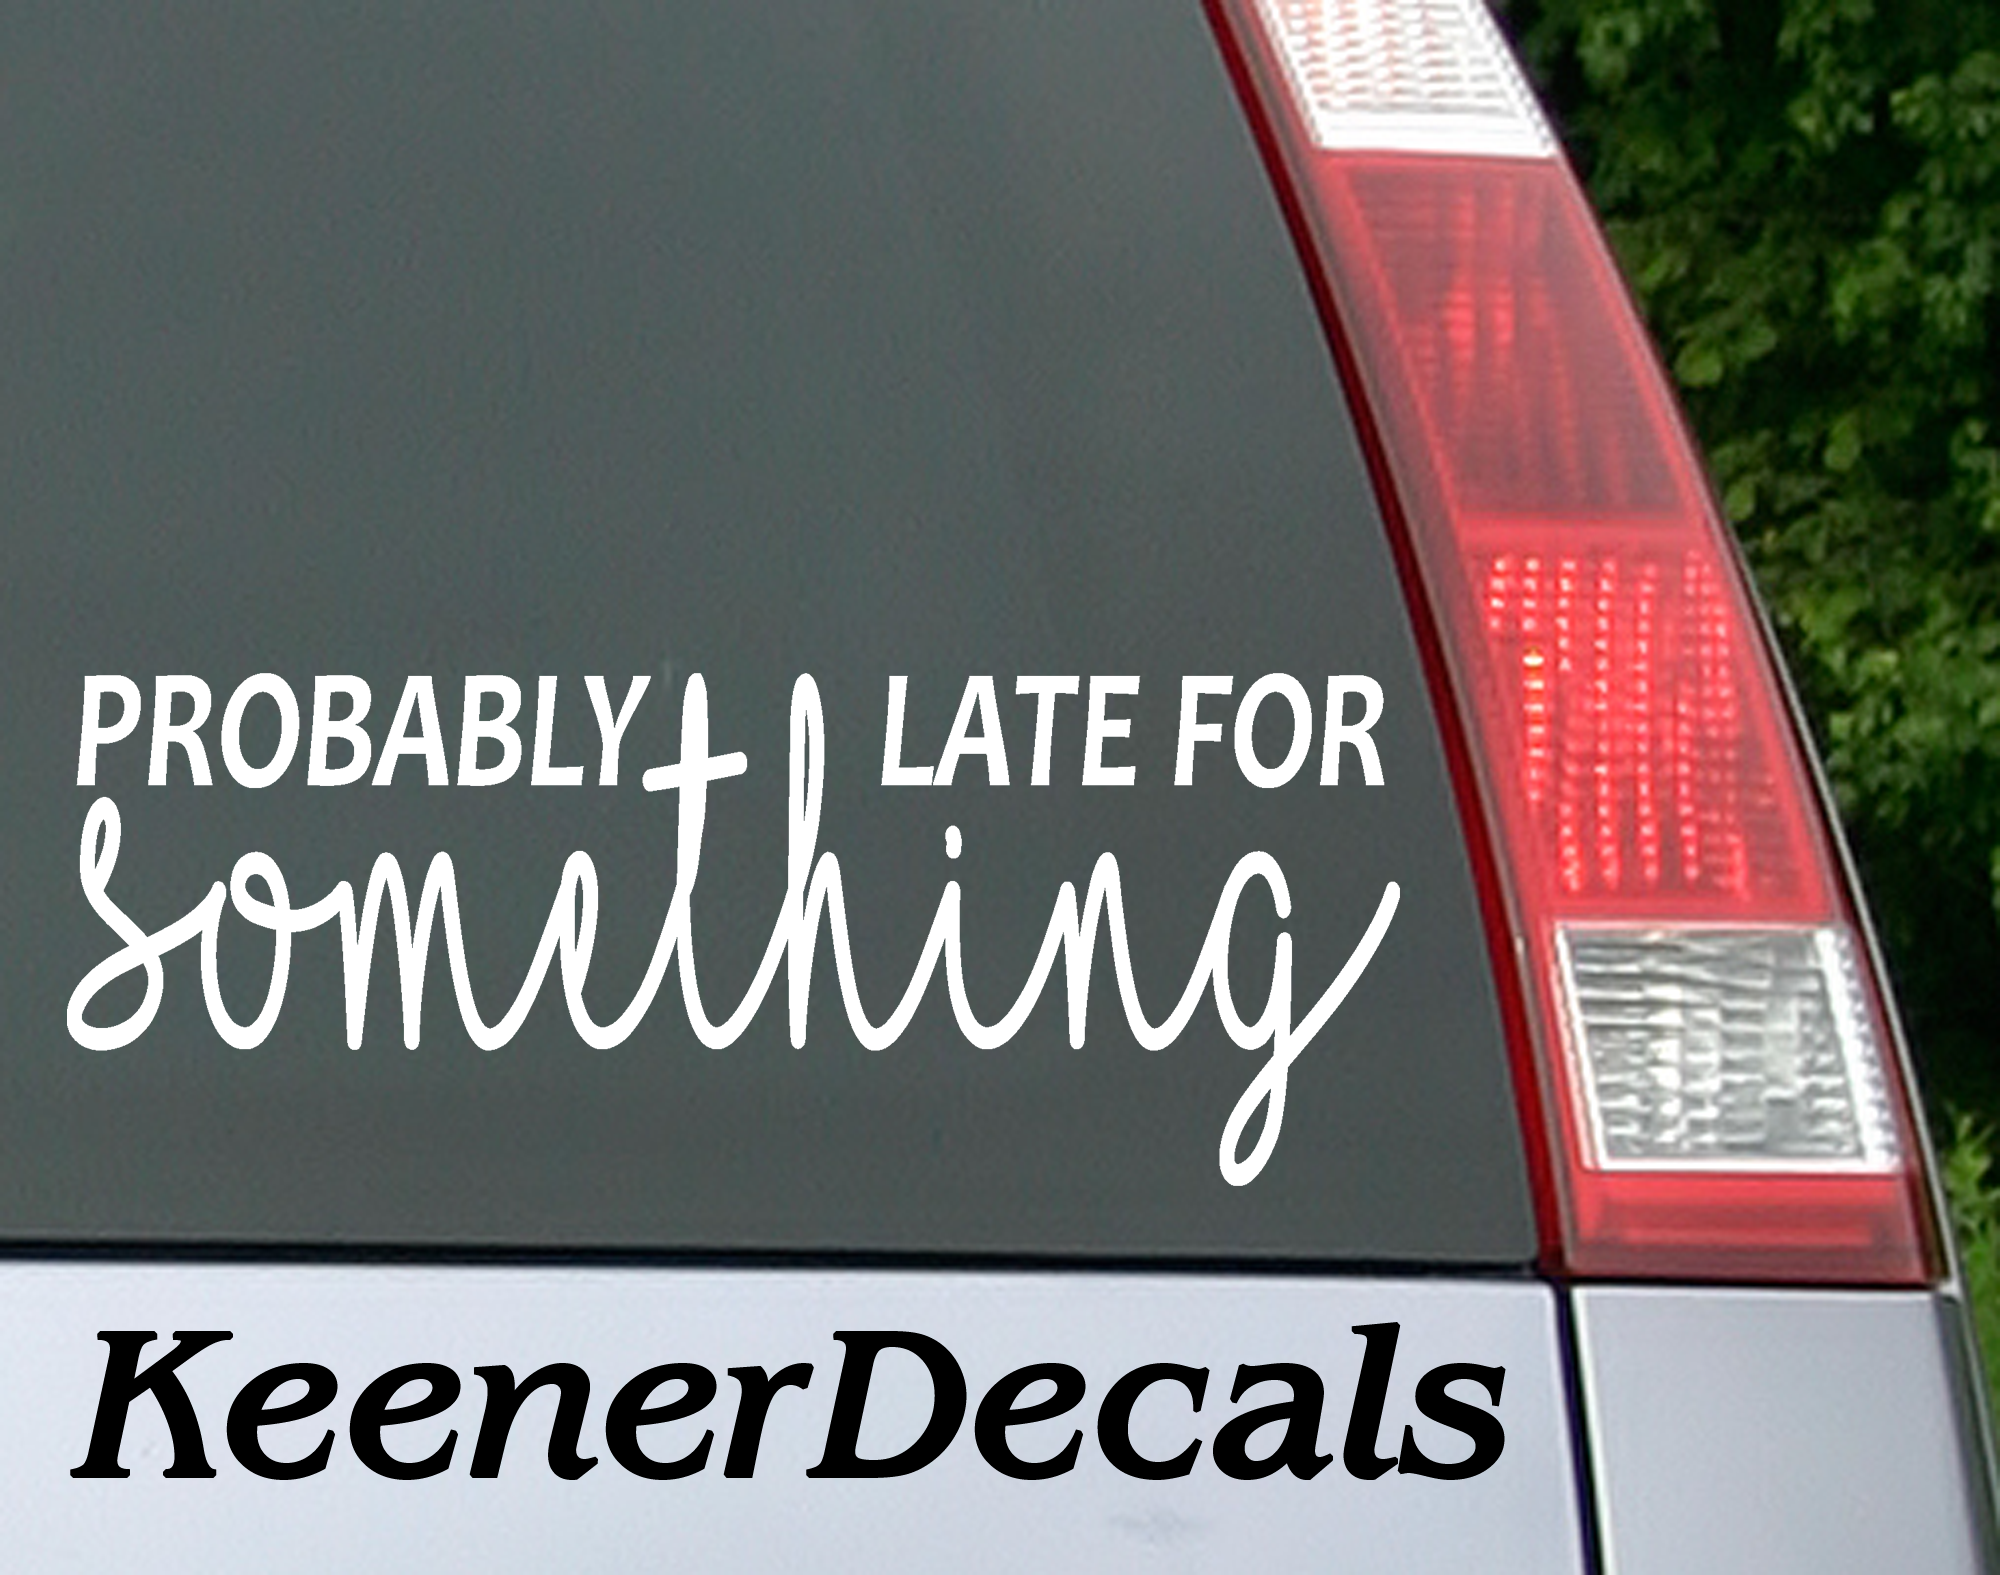 Probably Late For Something Vinyl Car Decal Bumper Sticker. Running late? Maybe! :P  6.5"W x 2.5"H Funny Car Decal, Car Sticker, Car Vinyl, Bumper Sticker, Vinyl Stickers, Vinyl Sticker.